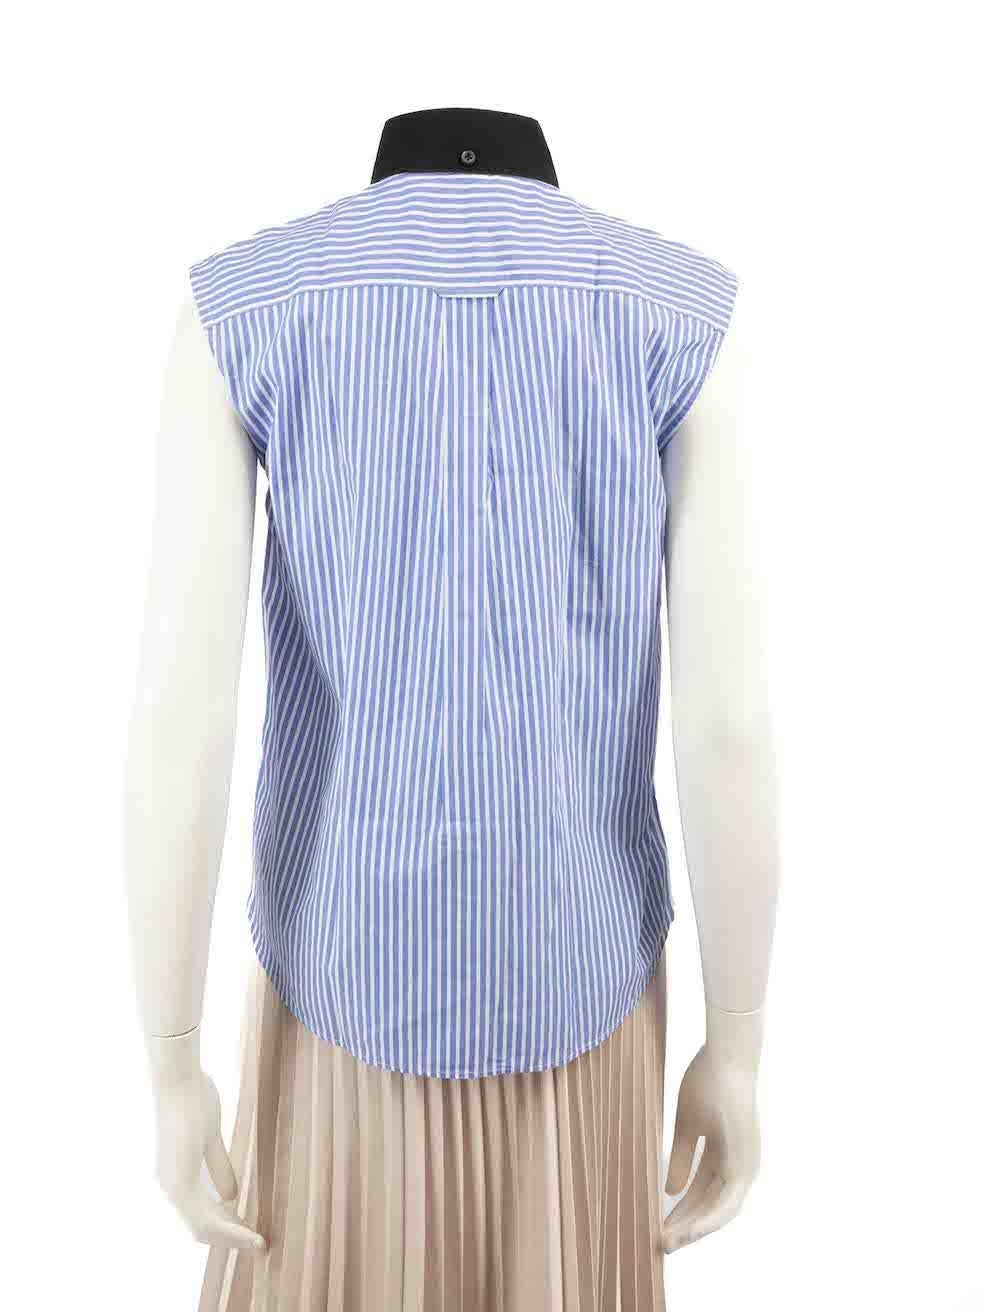 Prada Blue Striped Sleeveless Shirt Size XXS In Excellent Condition For Sale In London, GB